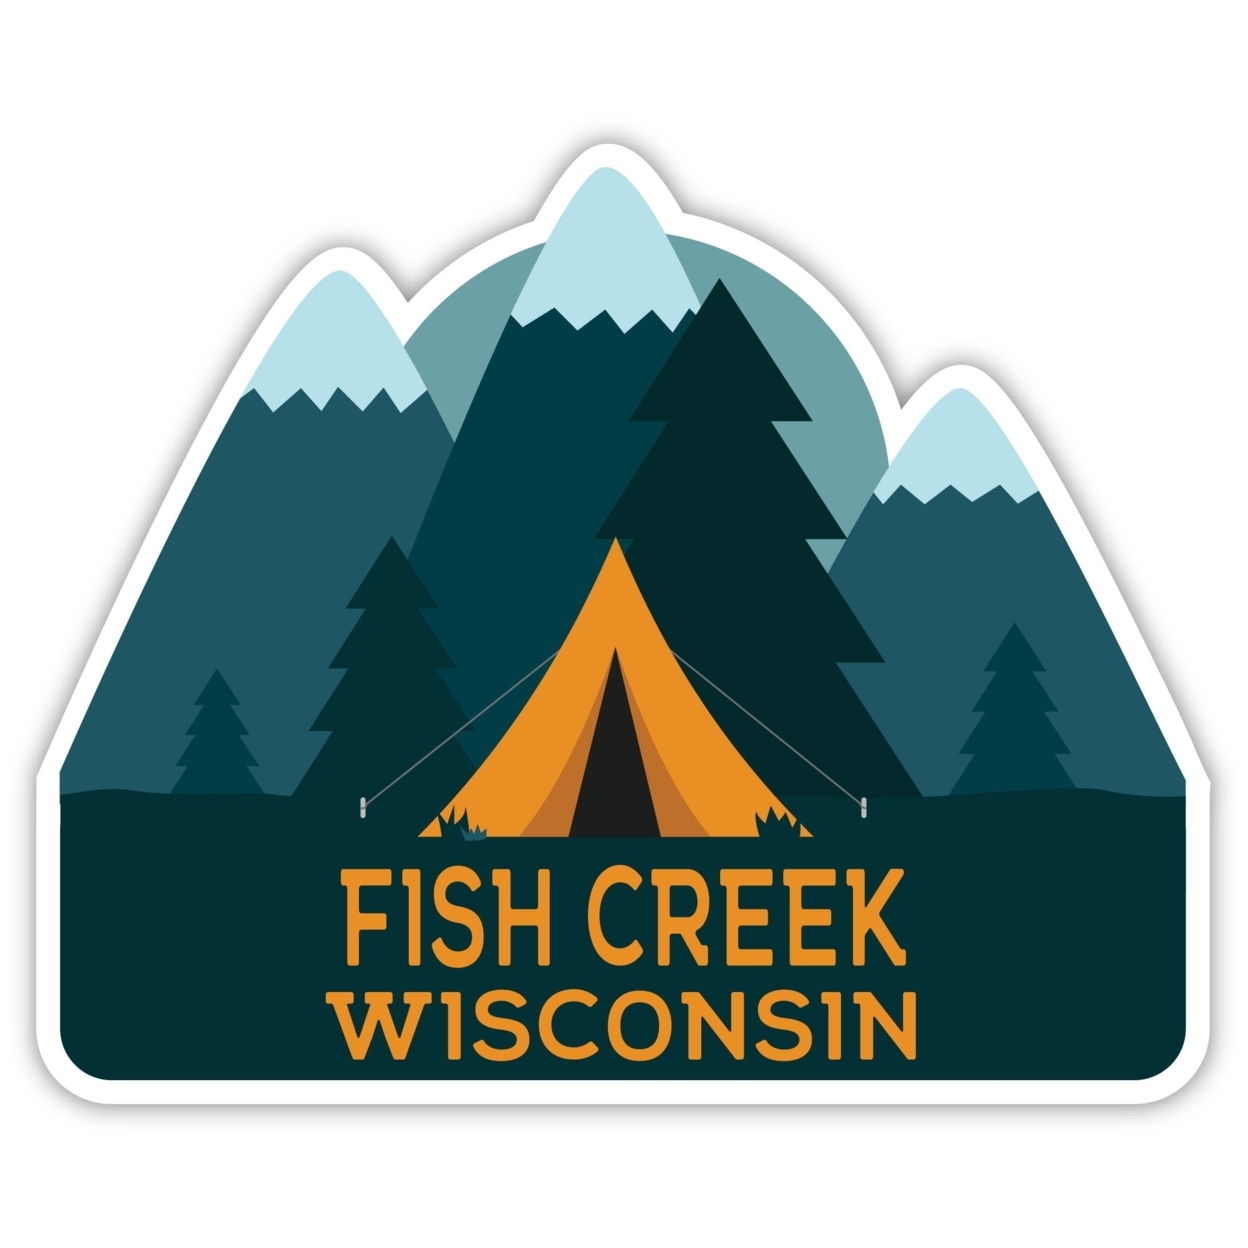 Fish Creek Wisconsin Souvenir Decorative Stickers (Choose Theme And Size) - 4-Pack, 4-Inch, Tent